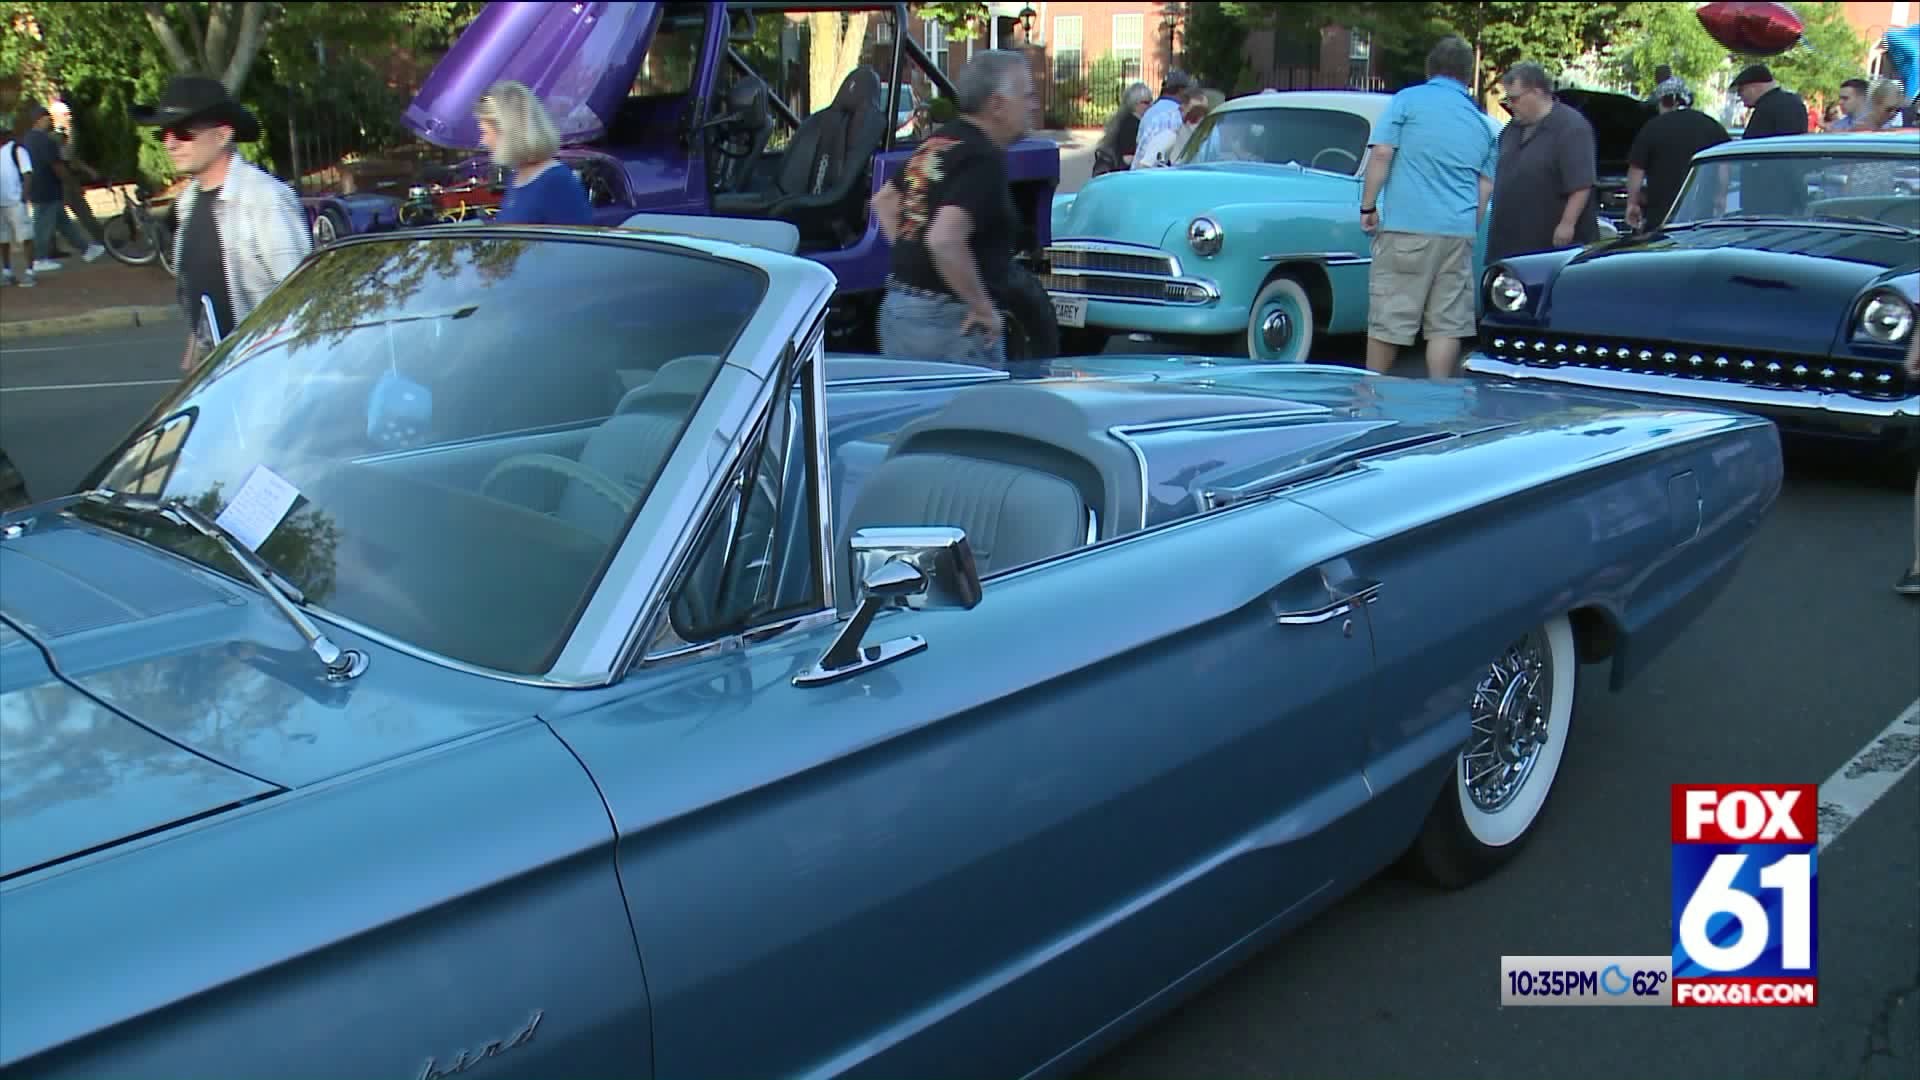 Family tradition at car cruise night